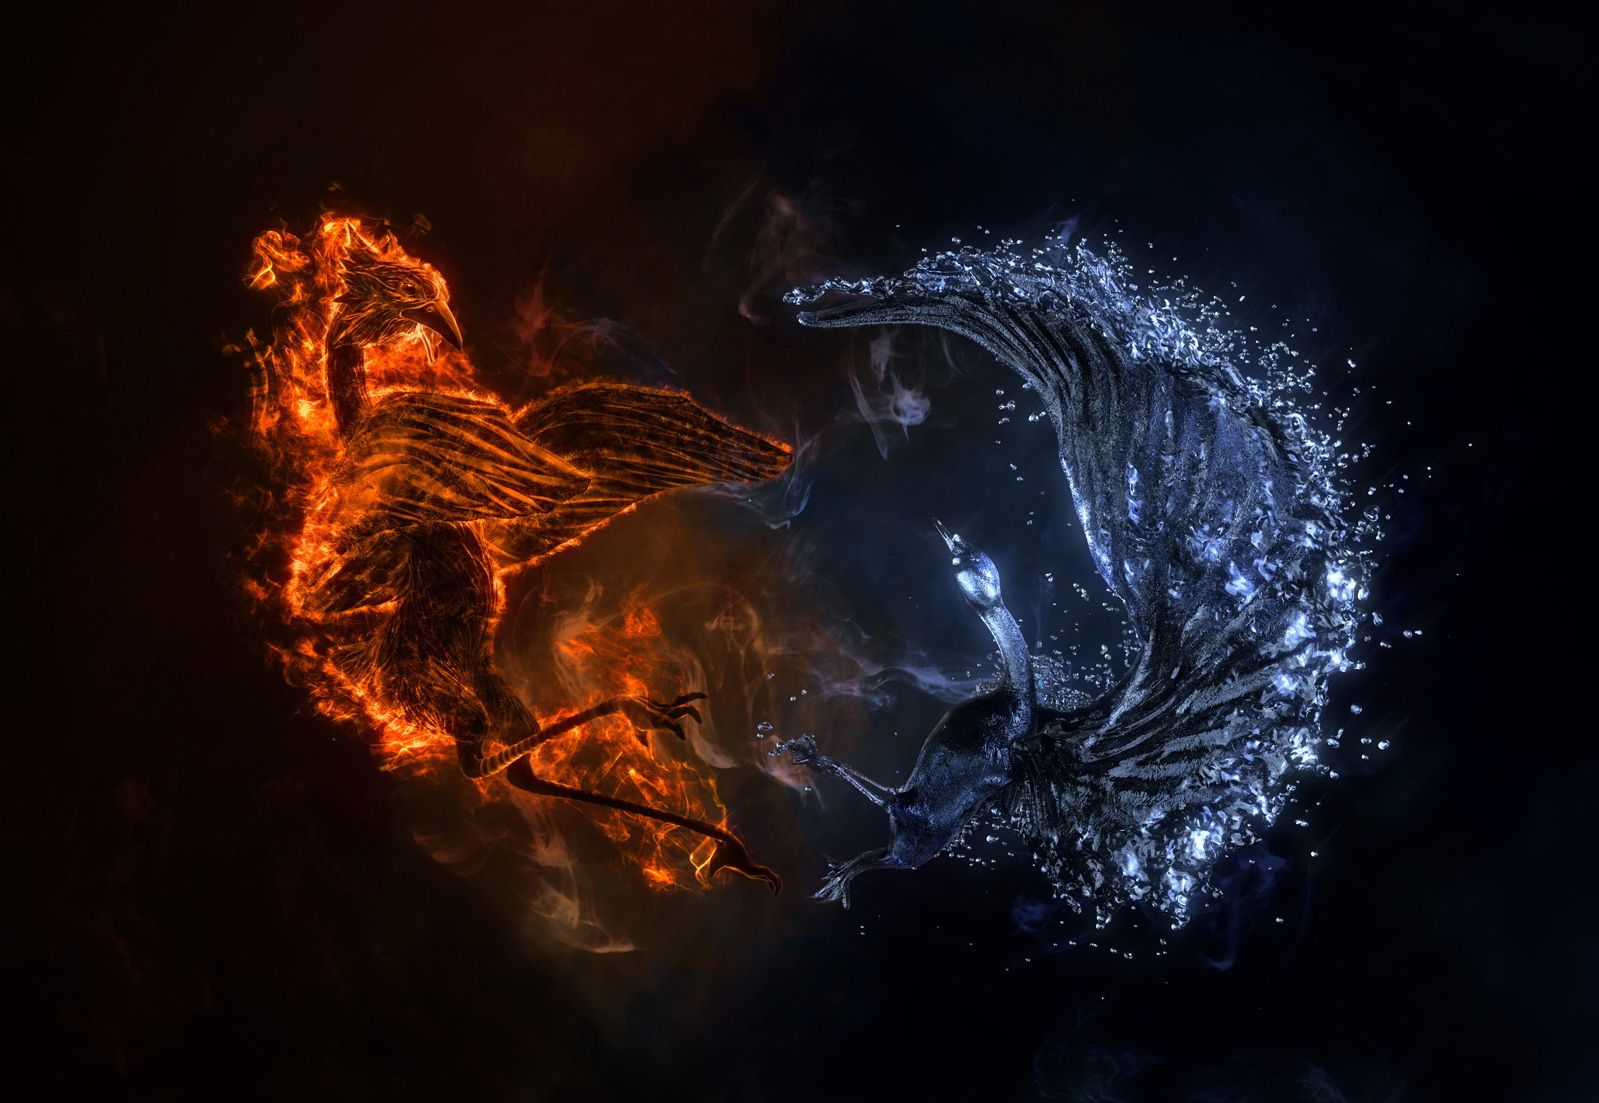 Wallpaper Fantasy Magical Animals Fire And Water Phoenix. Phoenix Wallpaper, Water Art, Fire Art